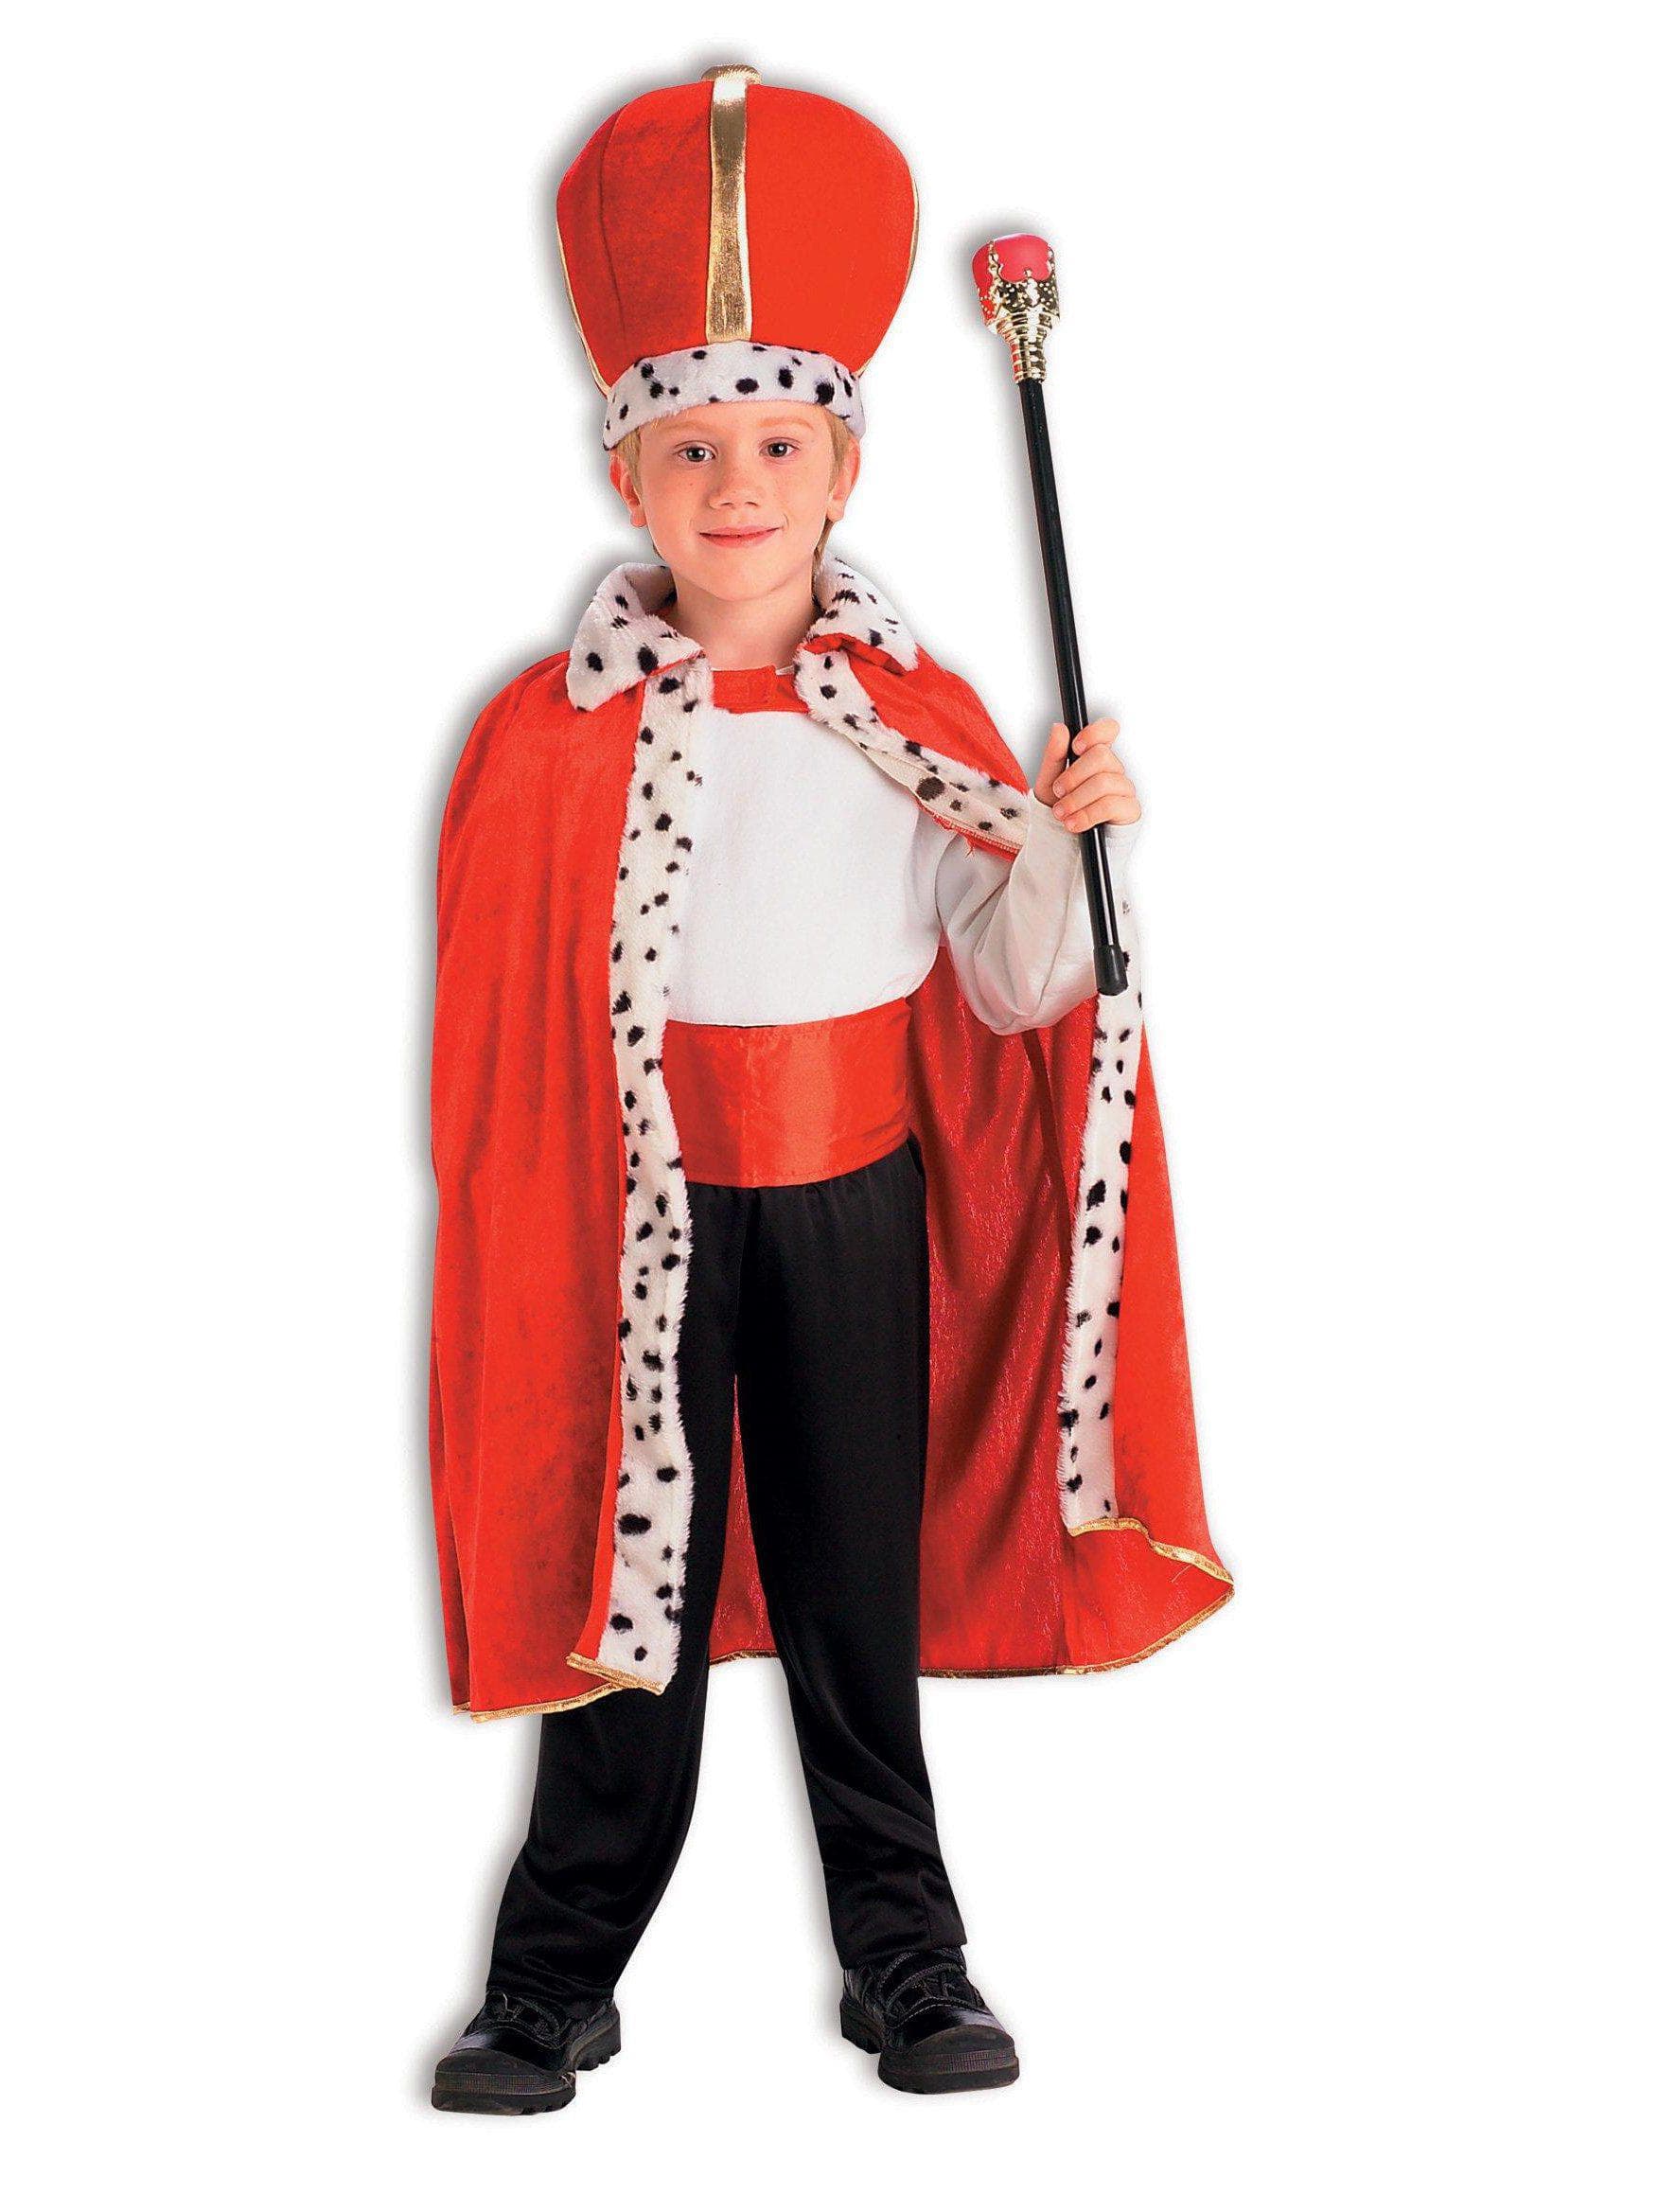 Kids' Royal Red King Cape and Crown - costumes.com